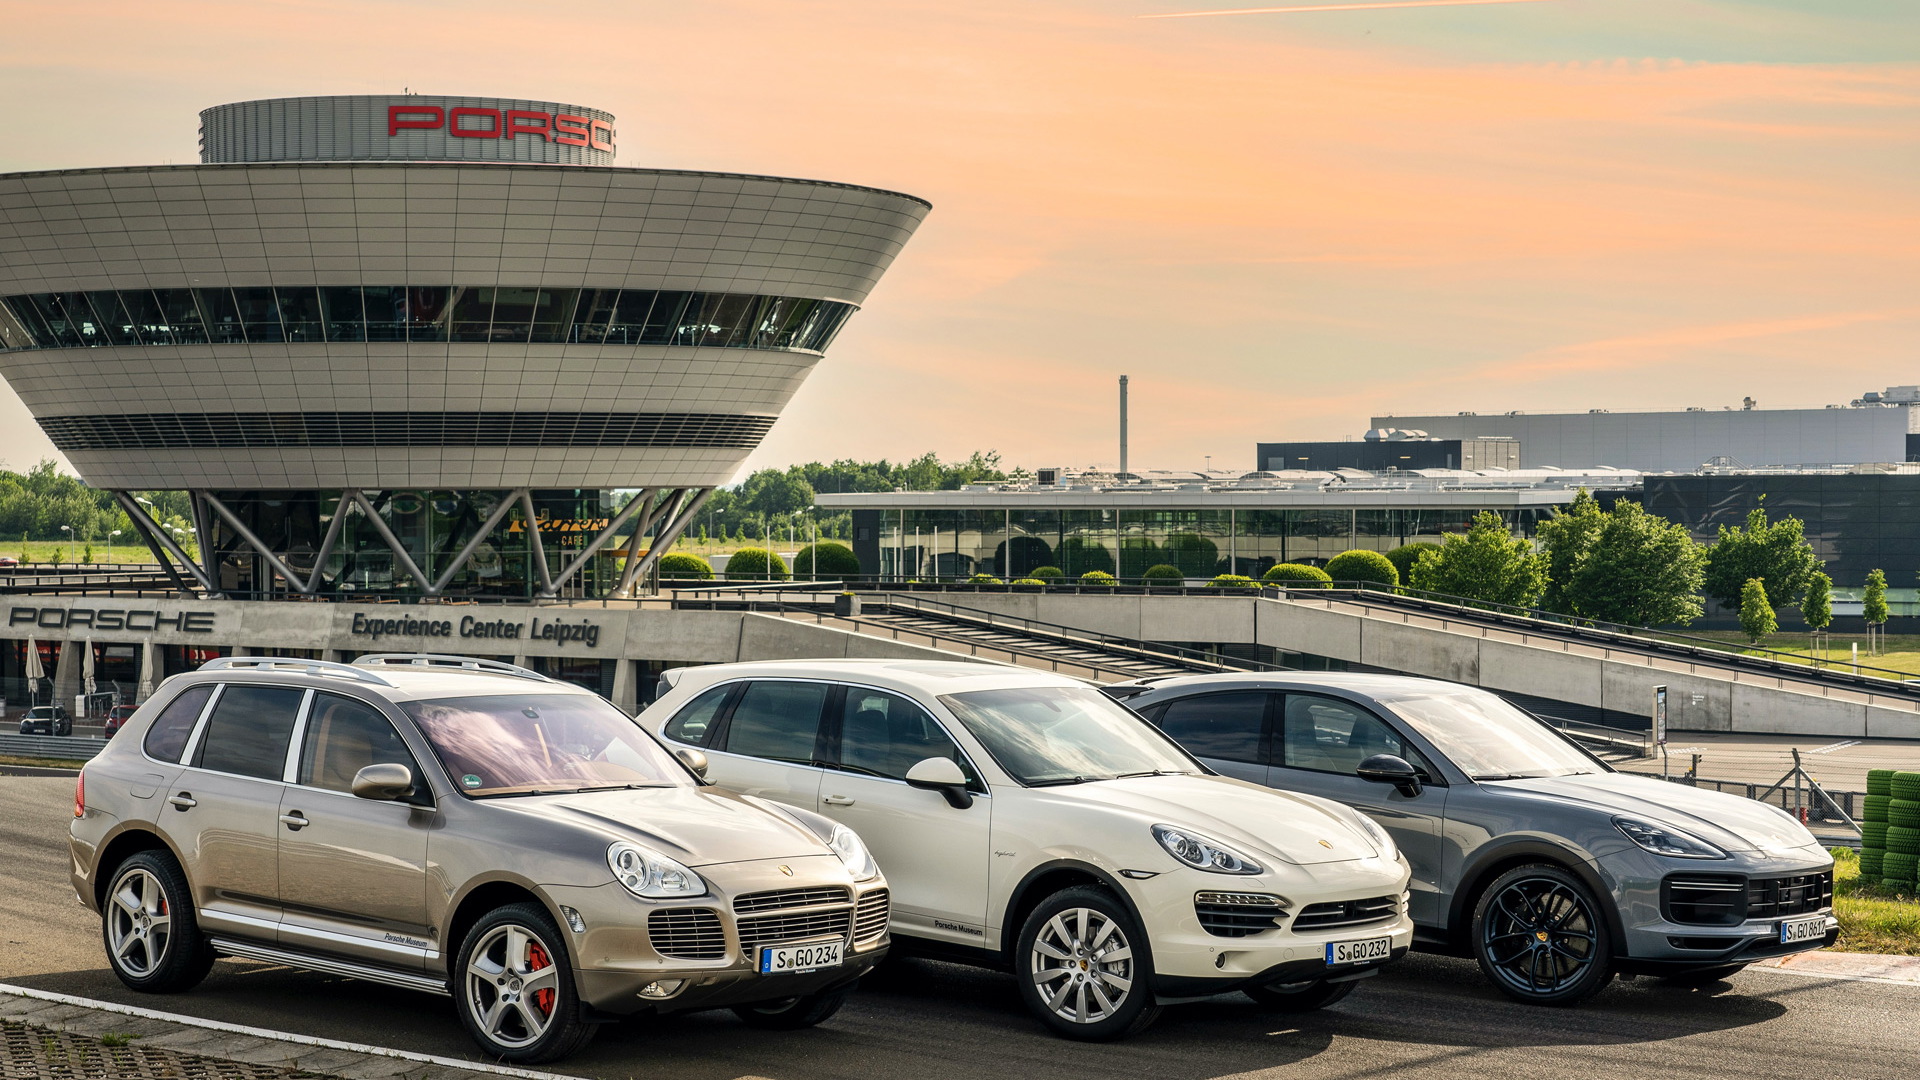 The Porsche Cayenne has spawned three generations since the first arrived in 2002